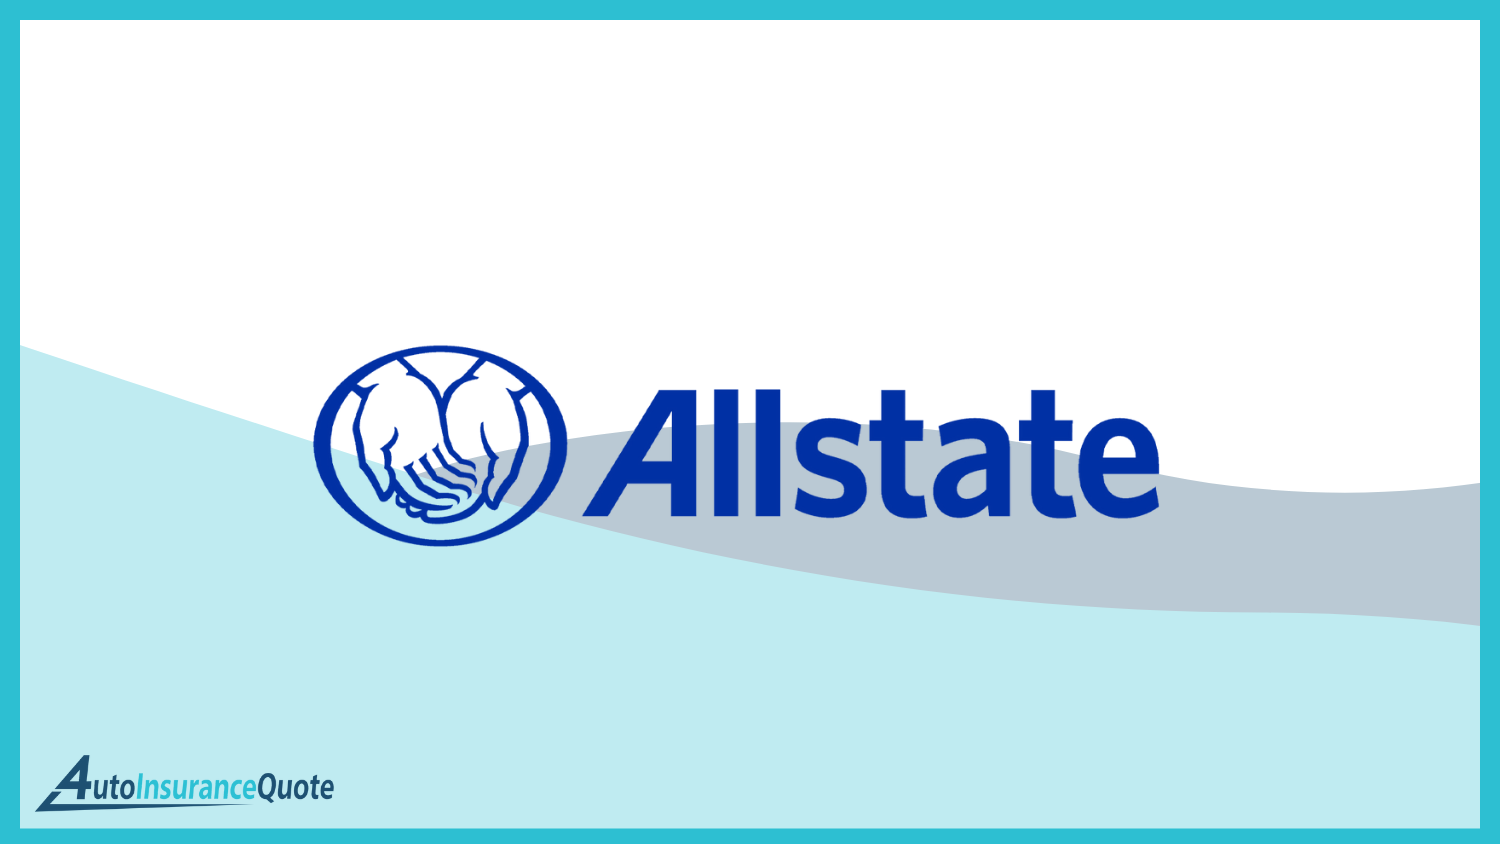 allstate Best Auto Insurance Companies That Do Not Monitor Your Driving